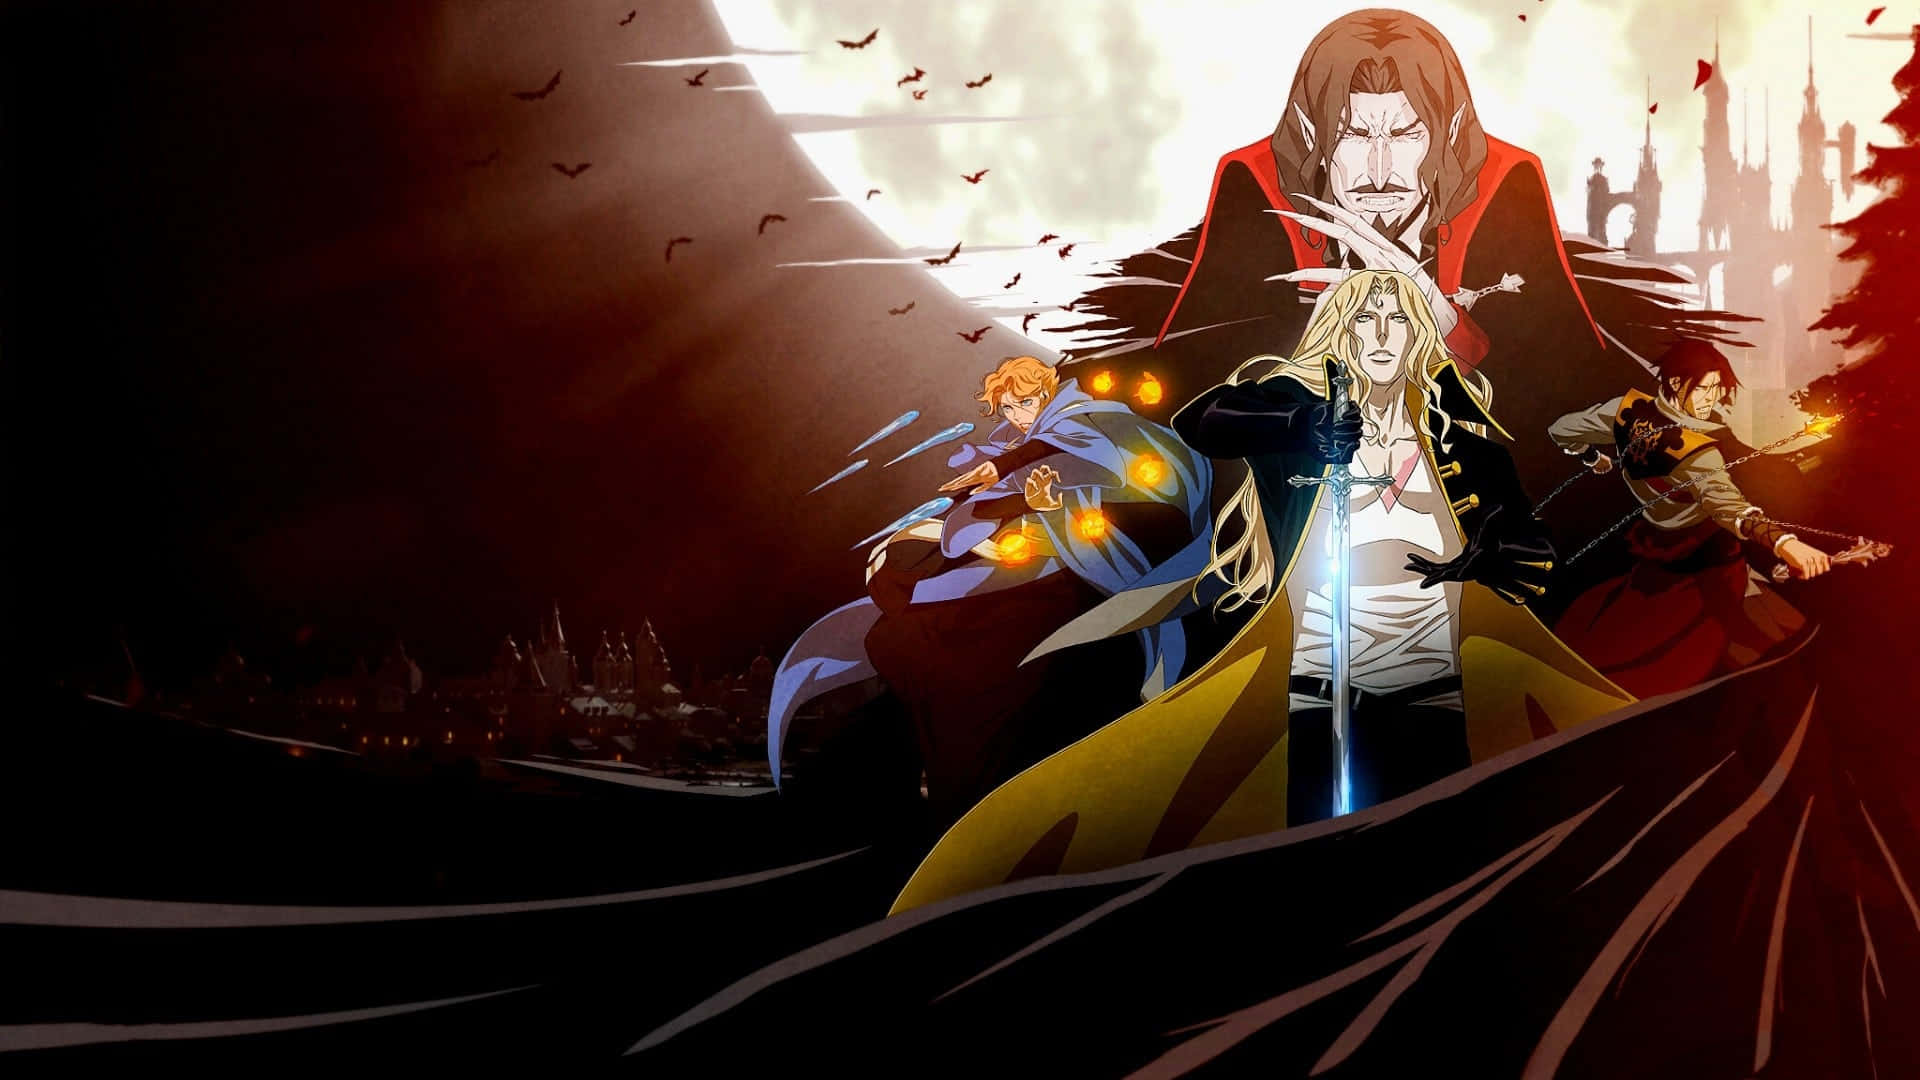 “A magical portal leading to a world of darkness—Castlevania.”